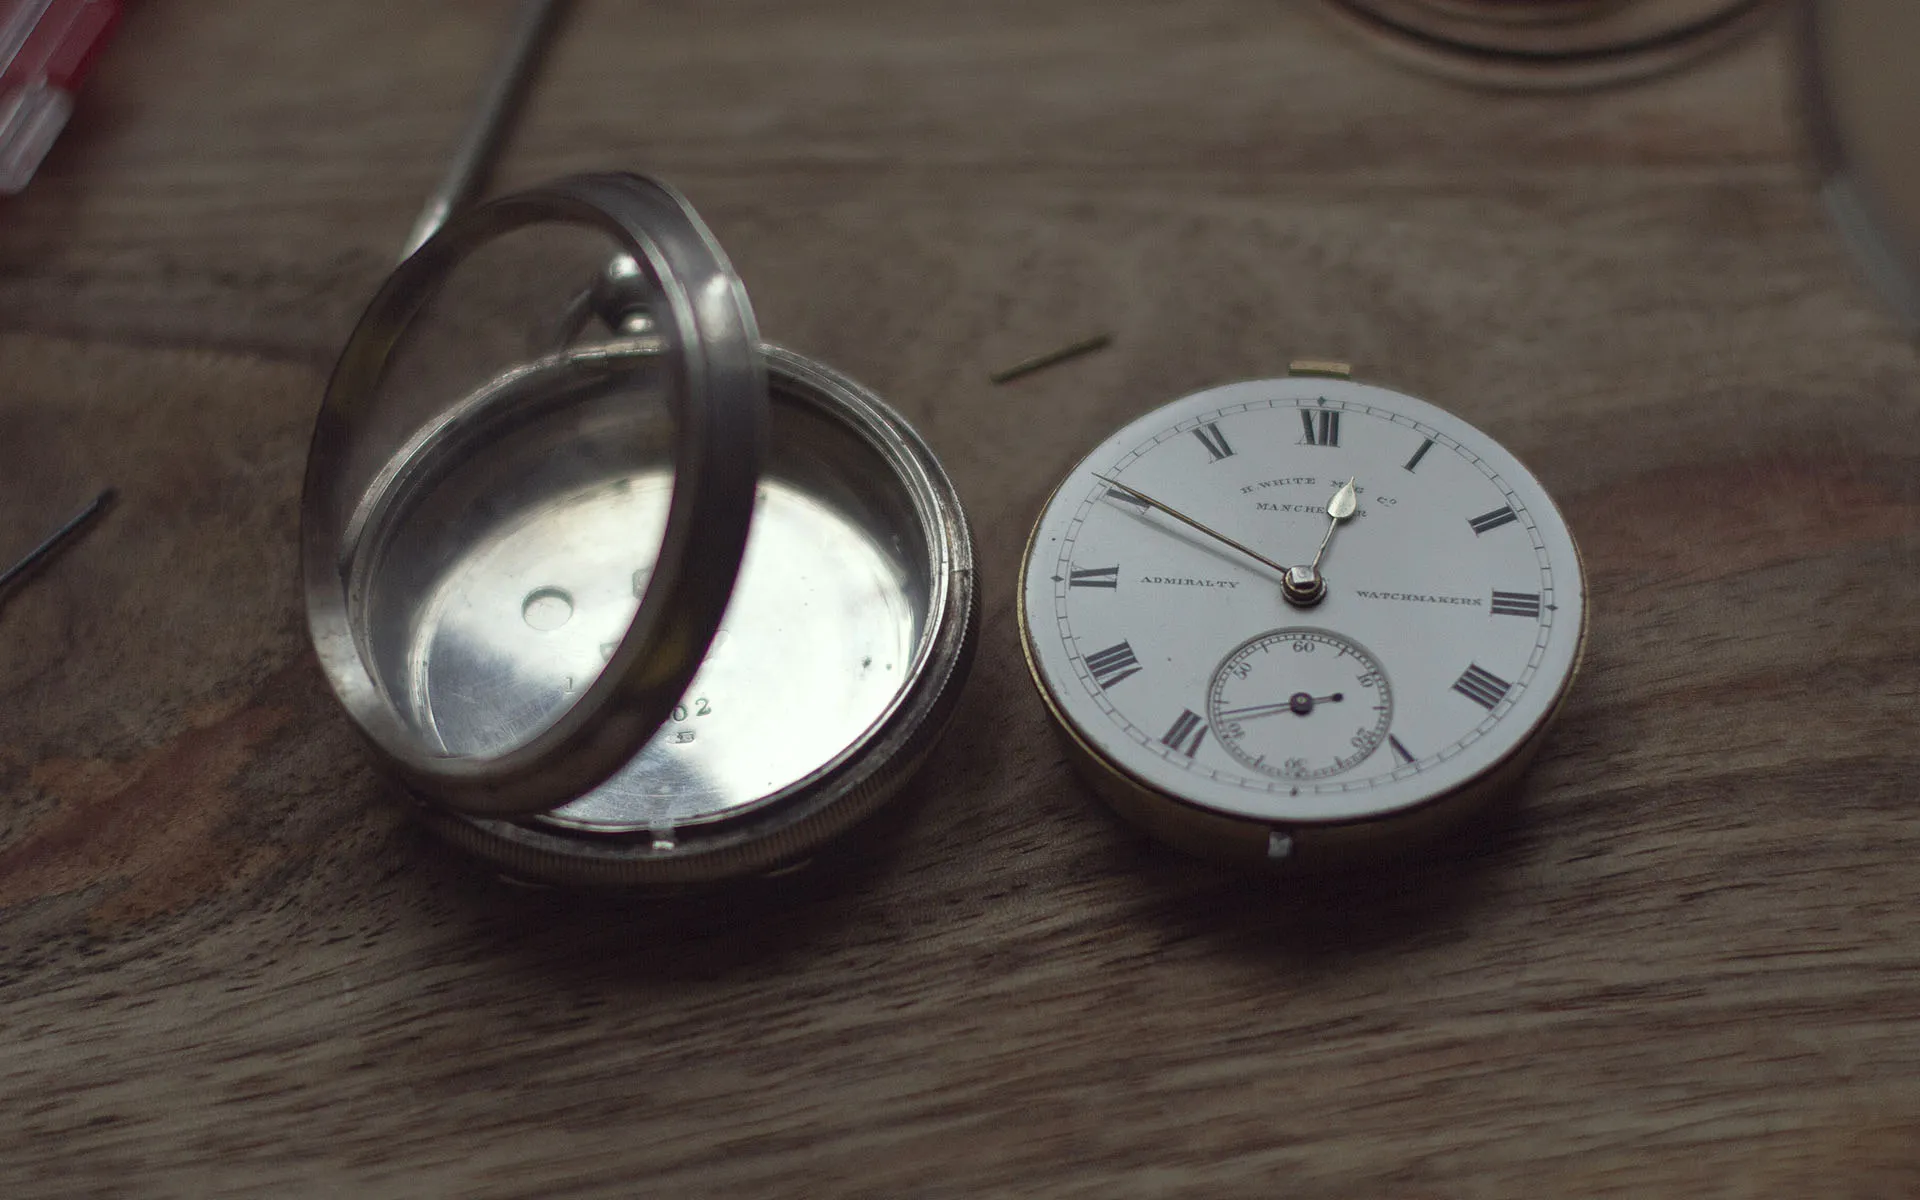 Mechanical pocket watch mechanism removed from it's silver case.